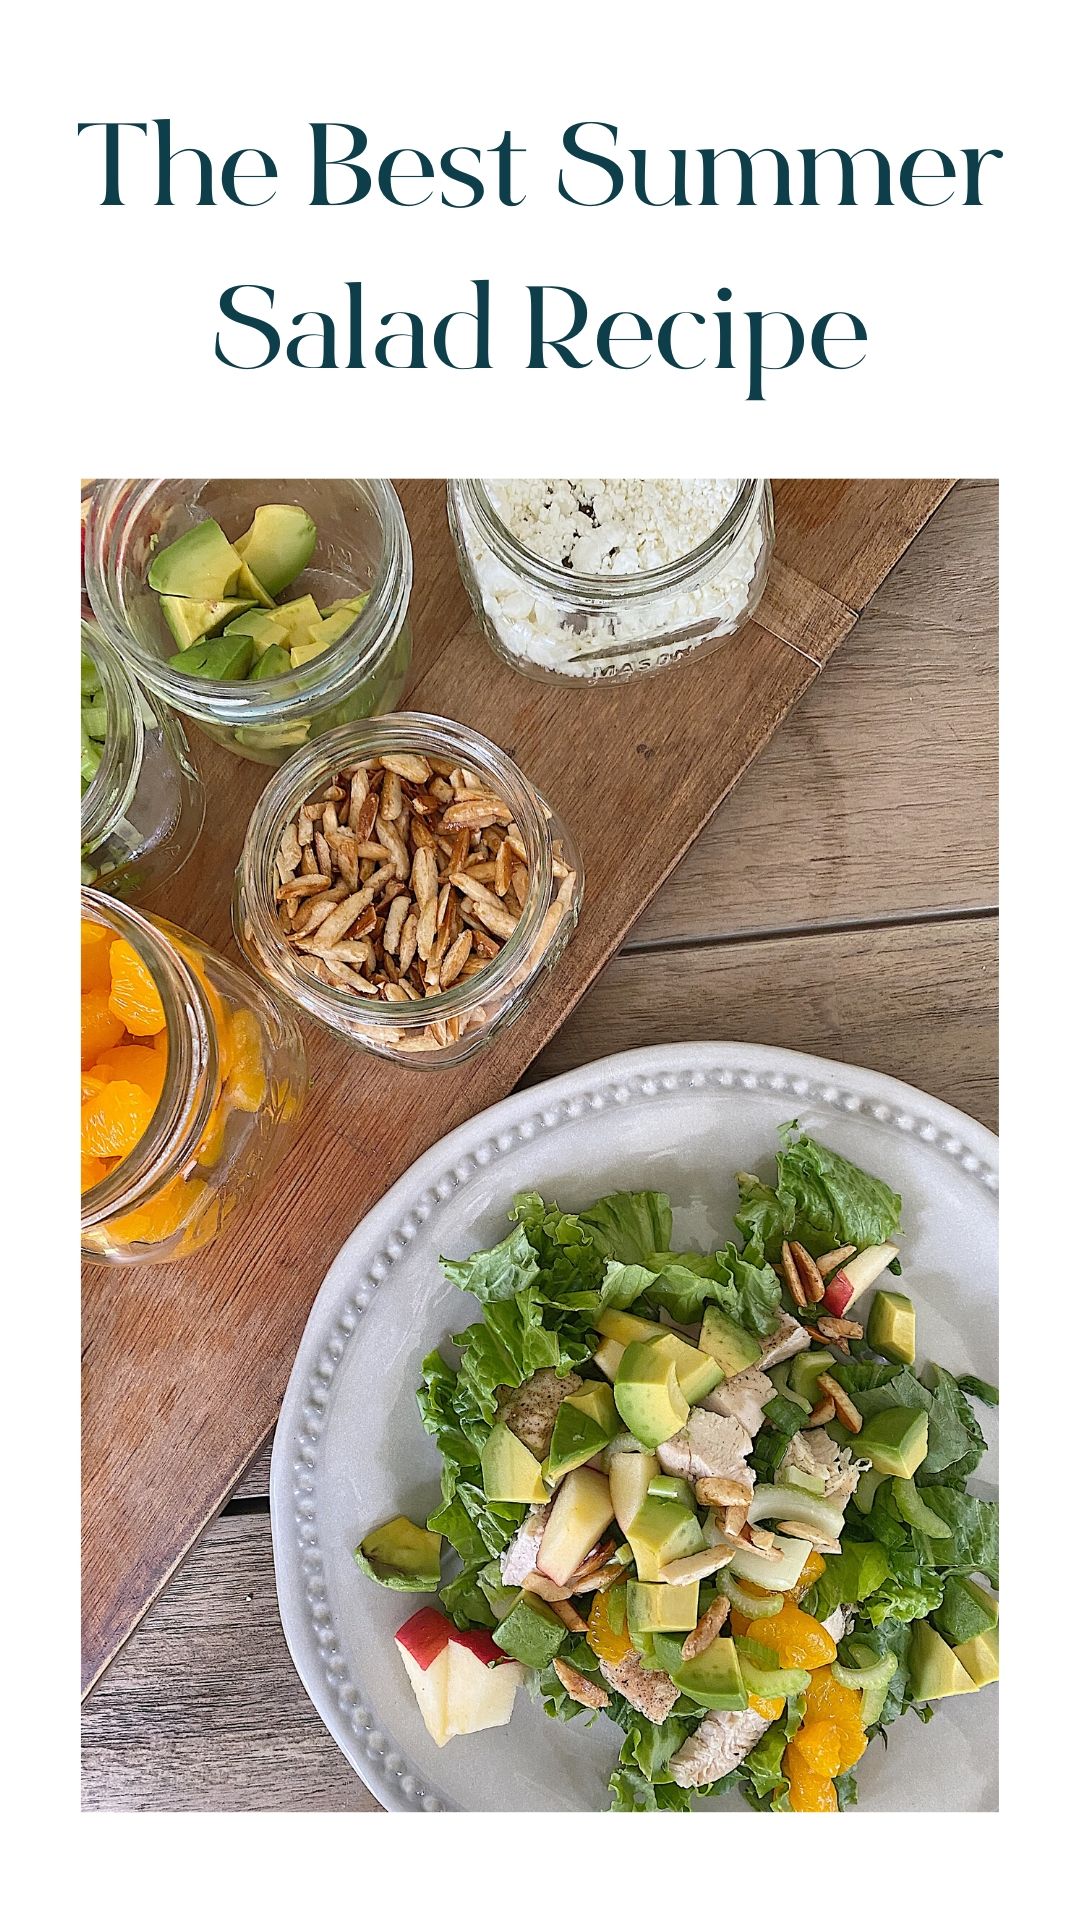 I served this summer chicken salad to my family last week and they all agreed this is one of the most awesome salad bar ideas!